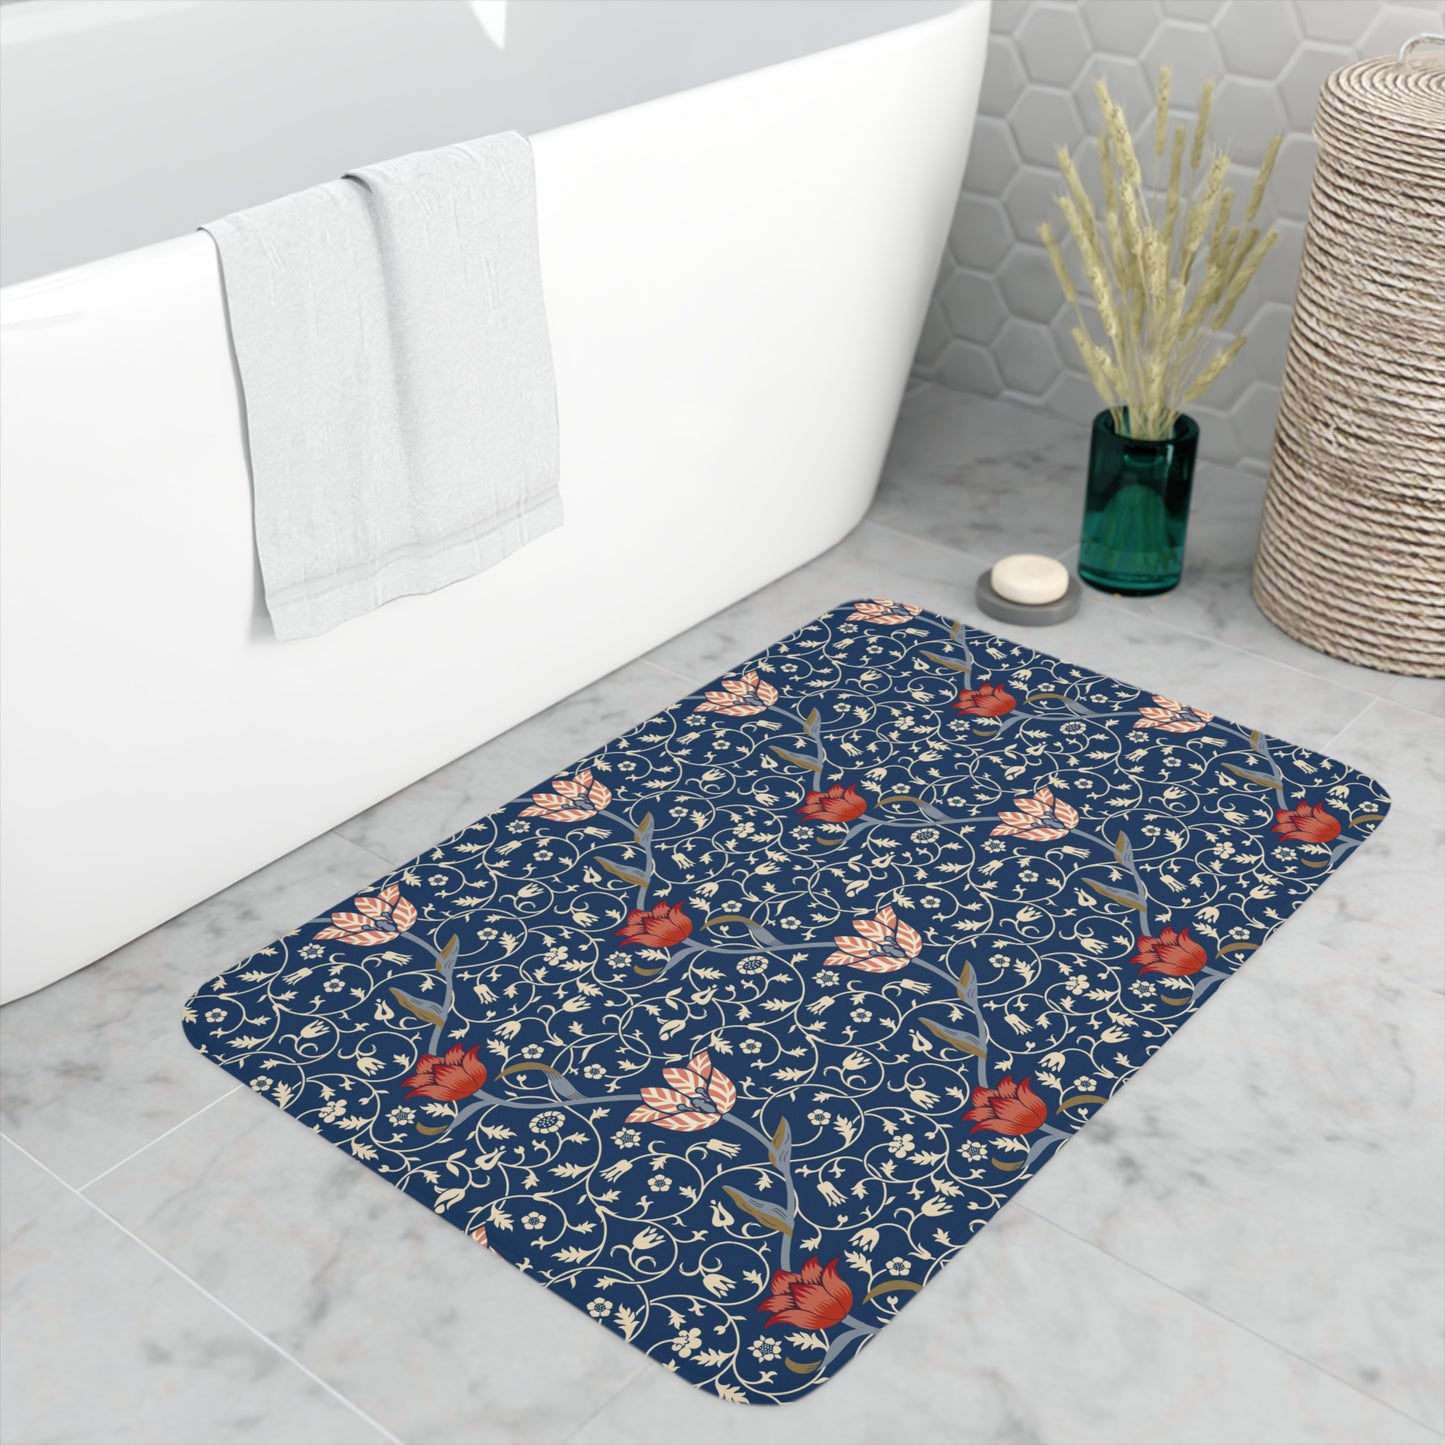 william-morris-amp-co-memory-foam-bath-mat-medway-collection-5